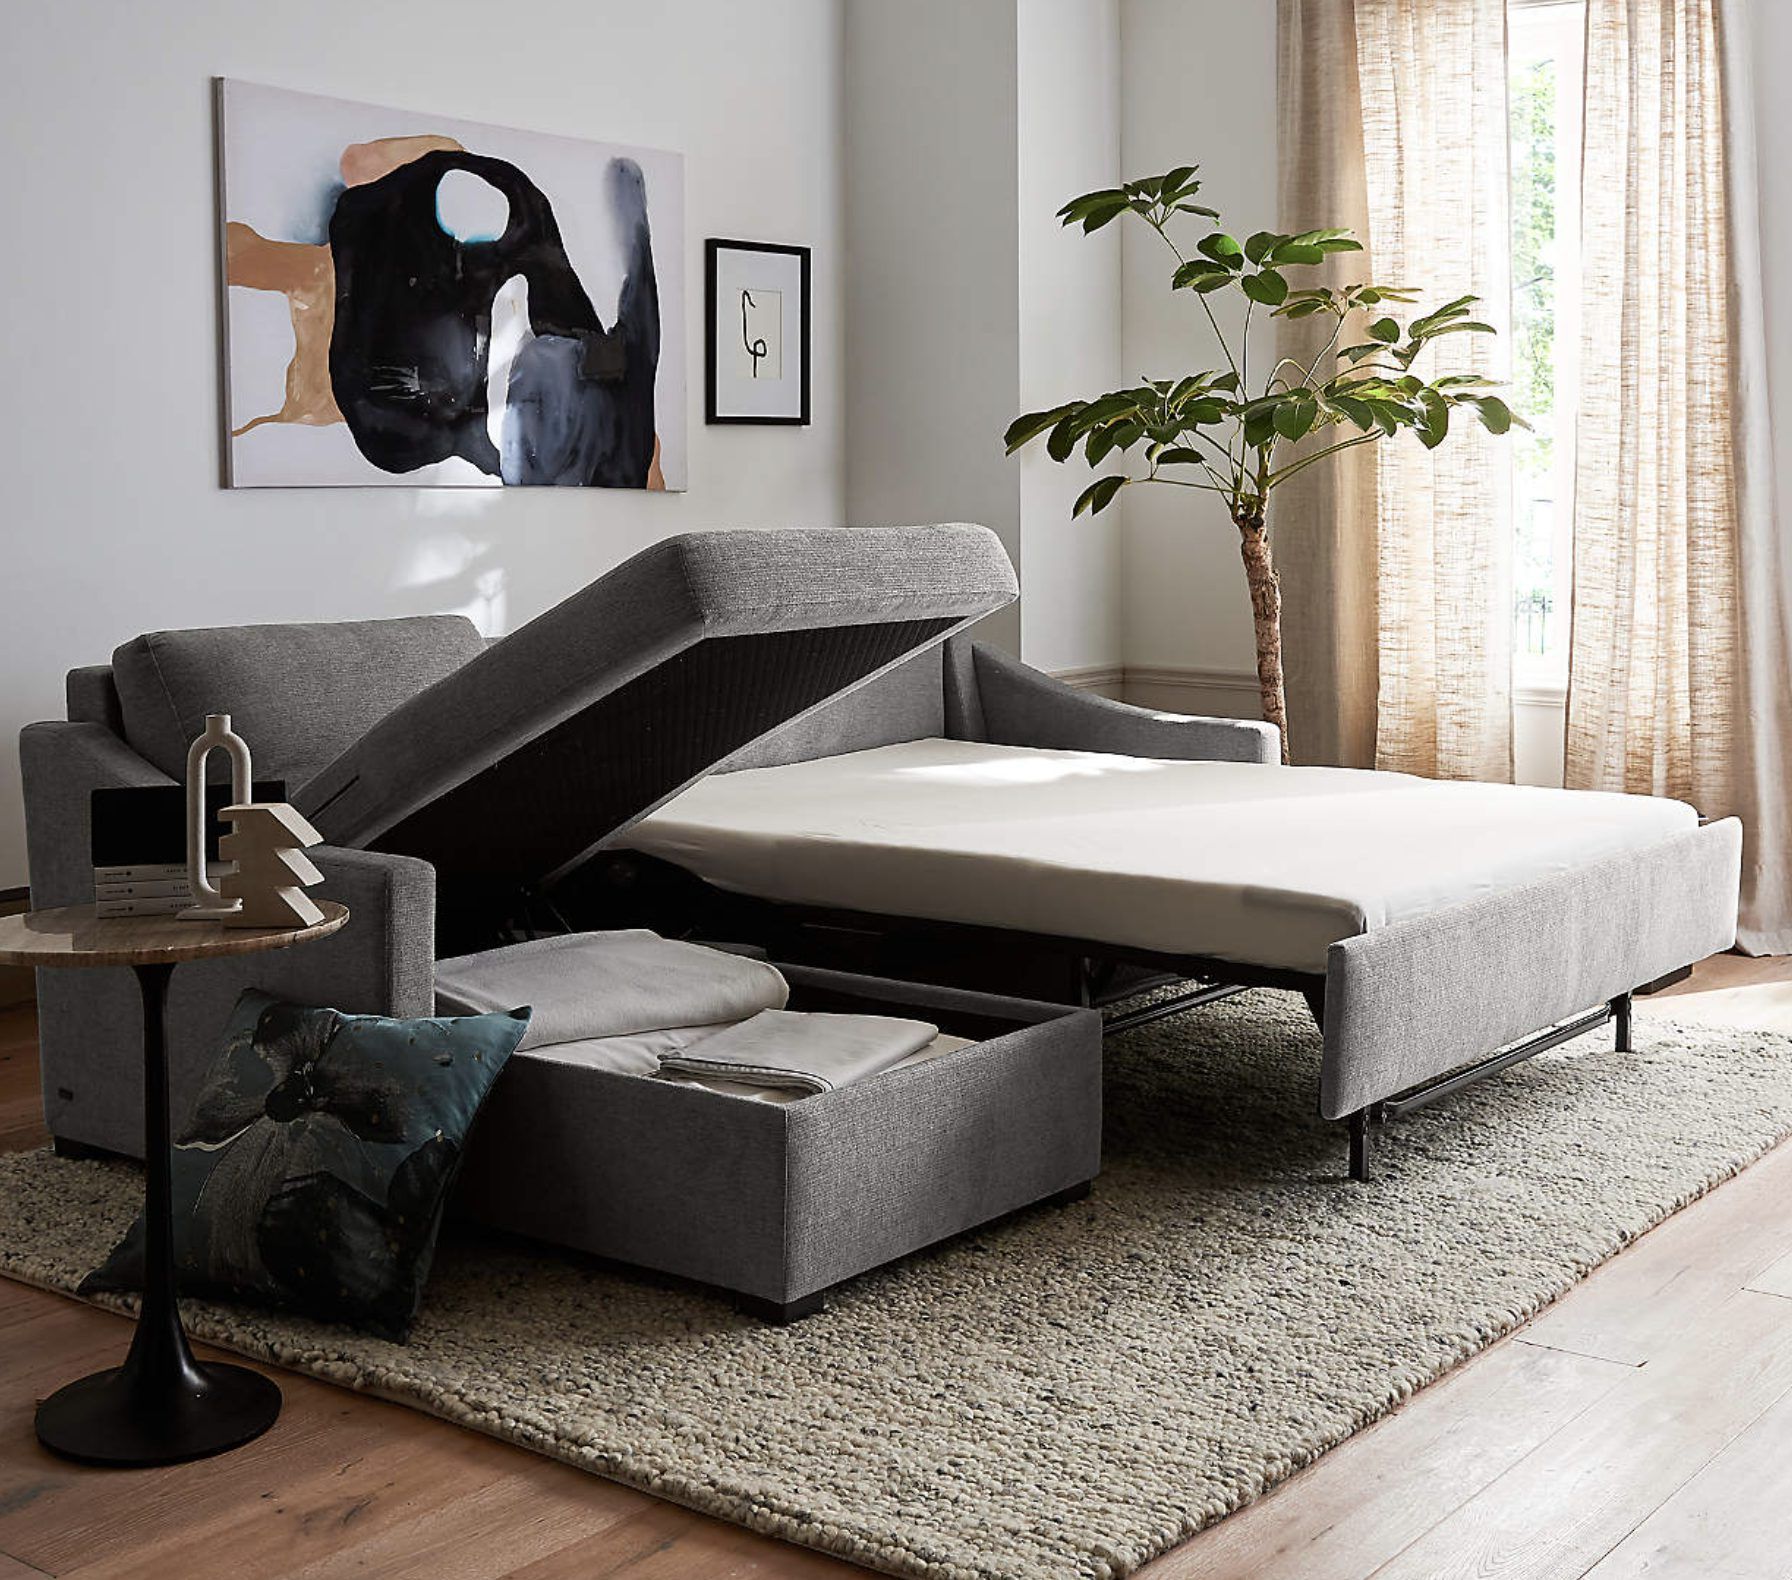 27 Of The Best Sectional Couches With Pull Out Beds In 2023 – Happily  Inspired Pertaining To Sleeper Sofas With Storage (View 15 of 20)